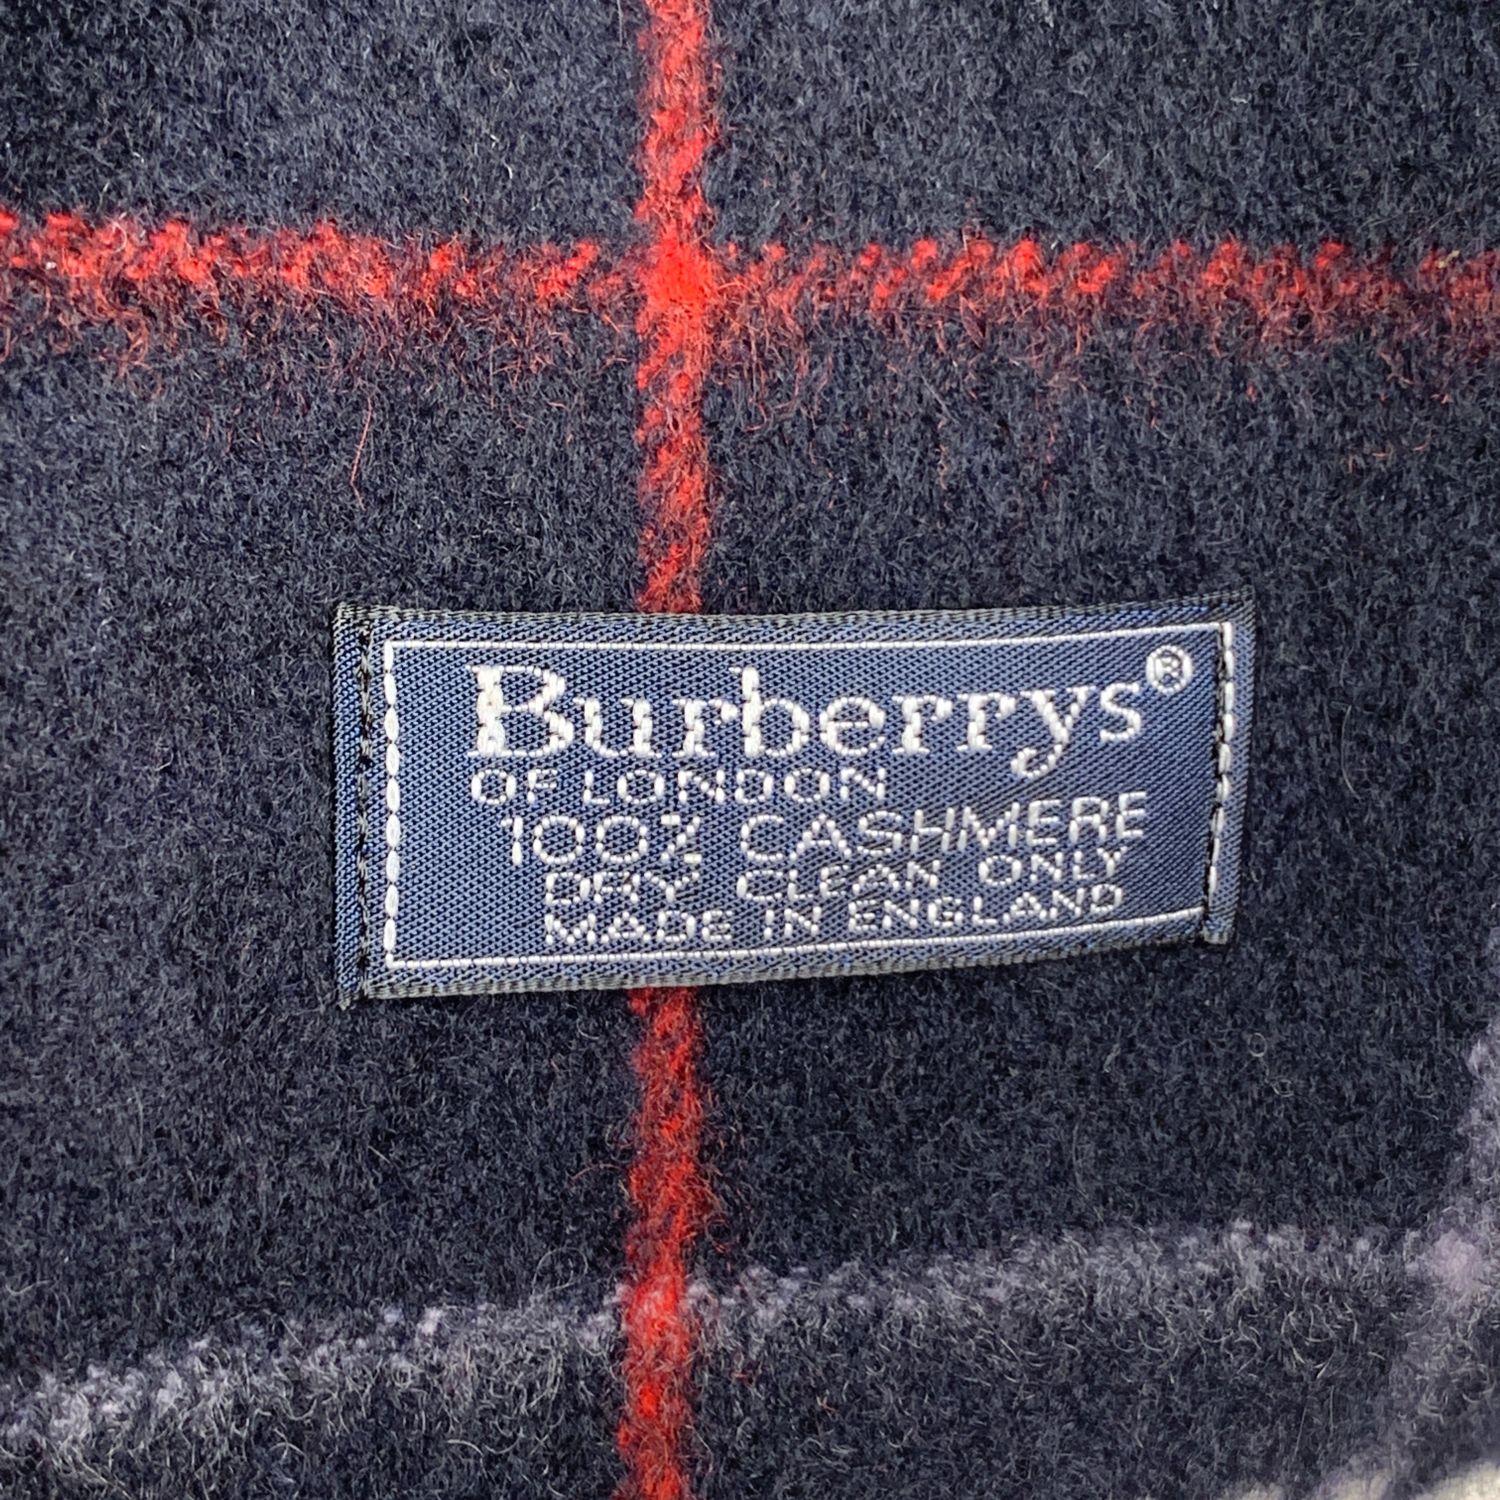 Vintage Burberry blue cashmere scarf. Composition: 100% cashmere. Checkered pattern. Fringed borders. Made in England. Width:12.5 inches - 31,7 cm - Lenght: 66 inches - 167,7 cm



Details

MATERIAL: Cashmere

COLOR: Blue

MODEL: Scarf

GENDER: